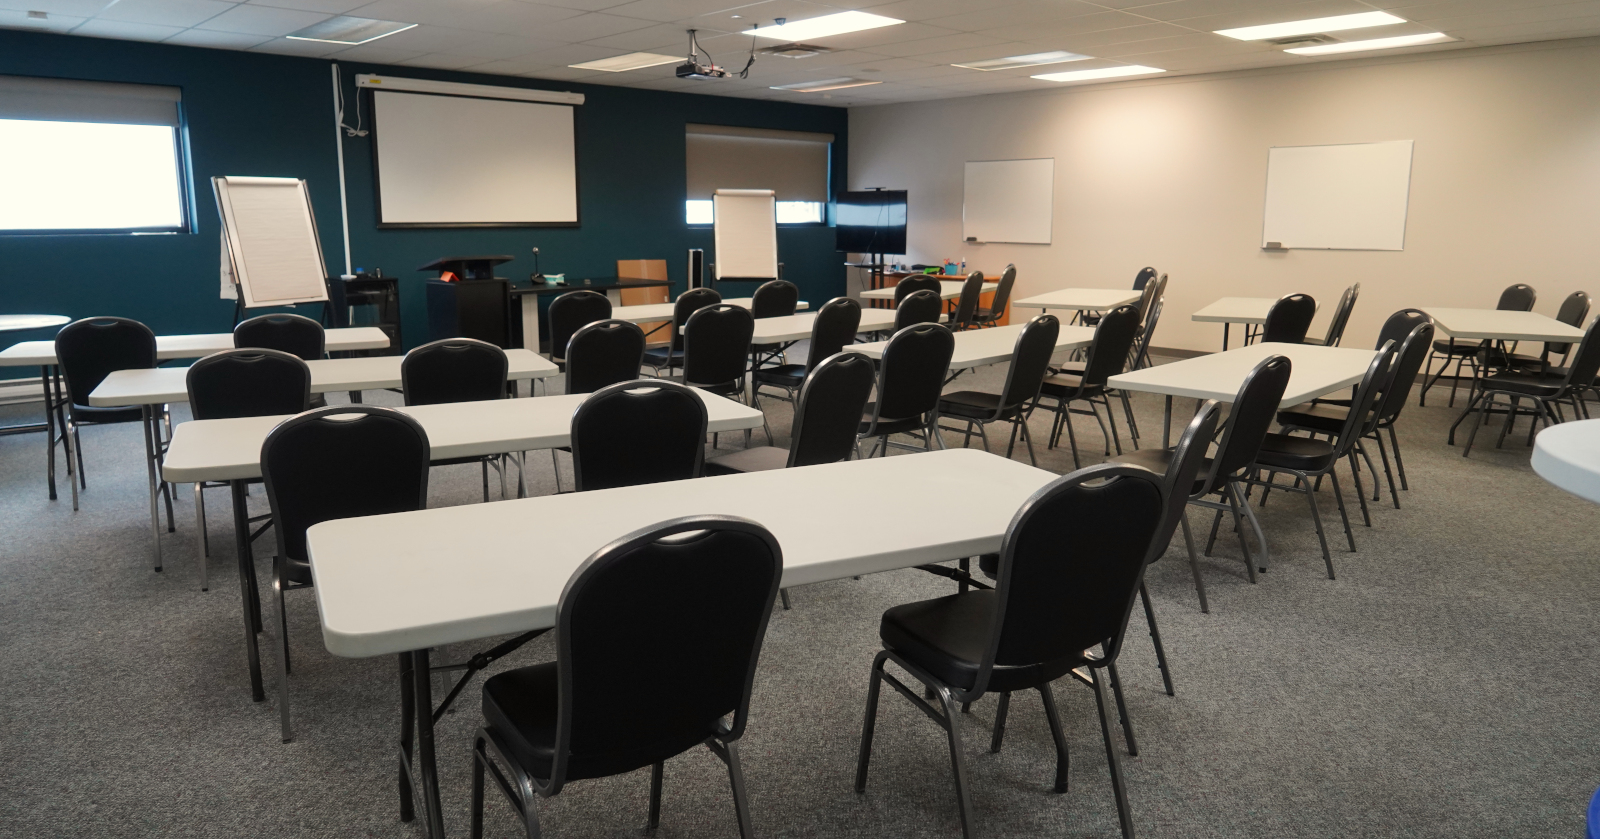 picture of classroom set up with tables in rows